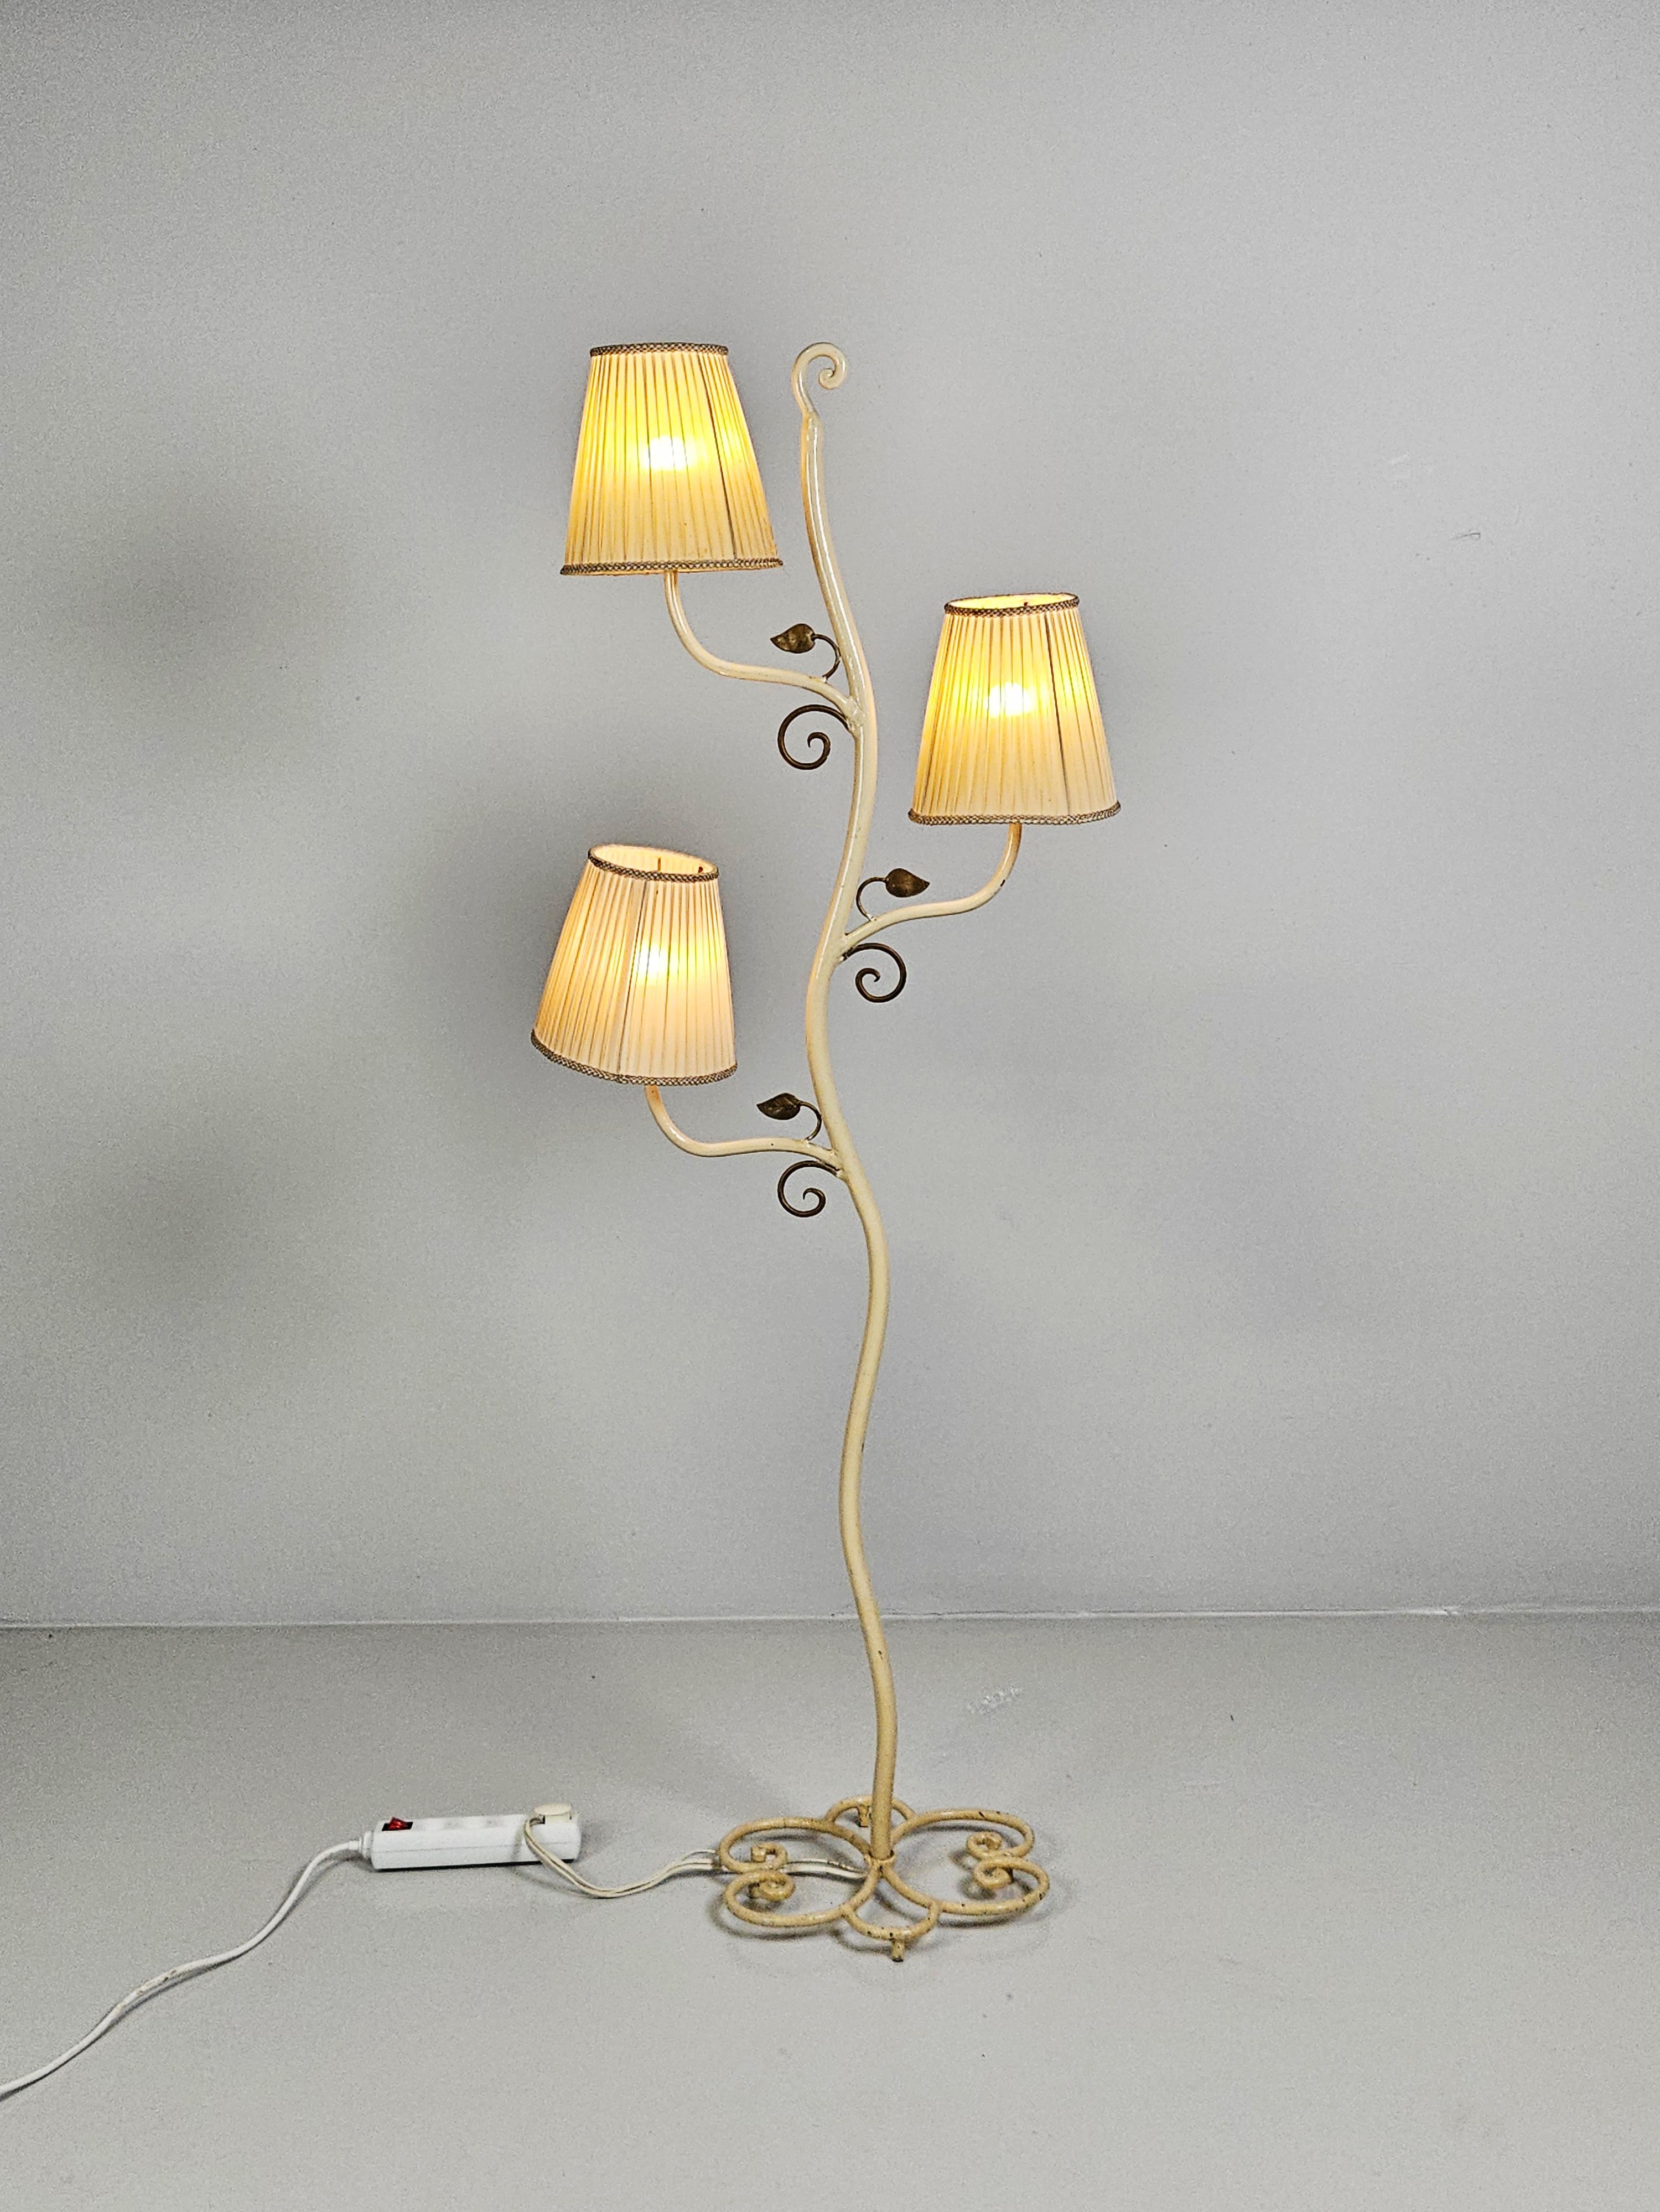 One of a kind floor lamp proberly produced by Bjerkås Armatur during the early part of the 20th century. 

Color is off white with leaves lacquered gold. 

Original shades are included but have holes and tares. 